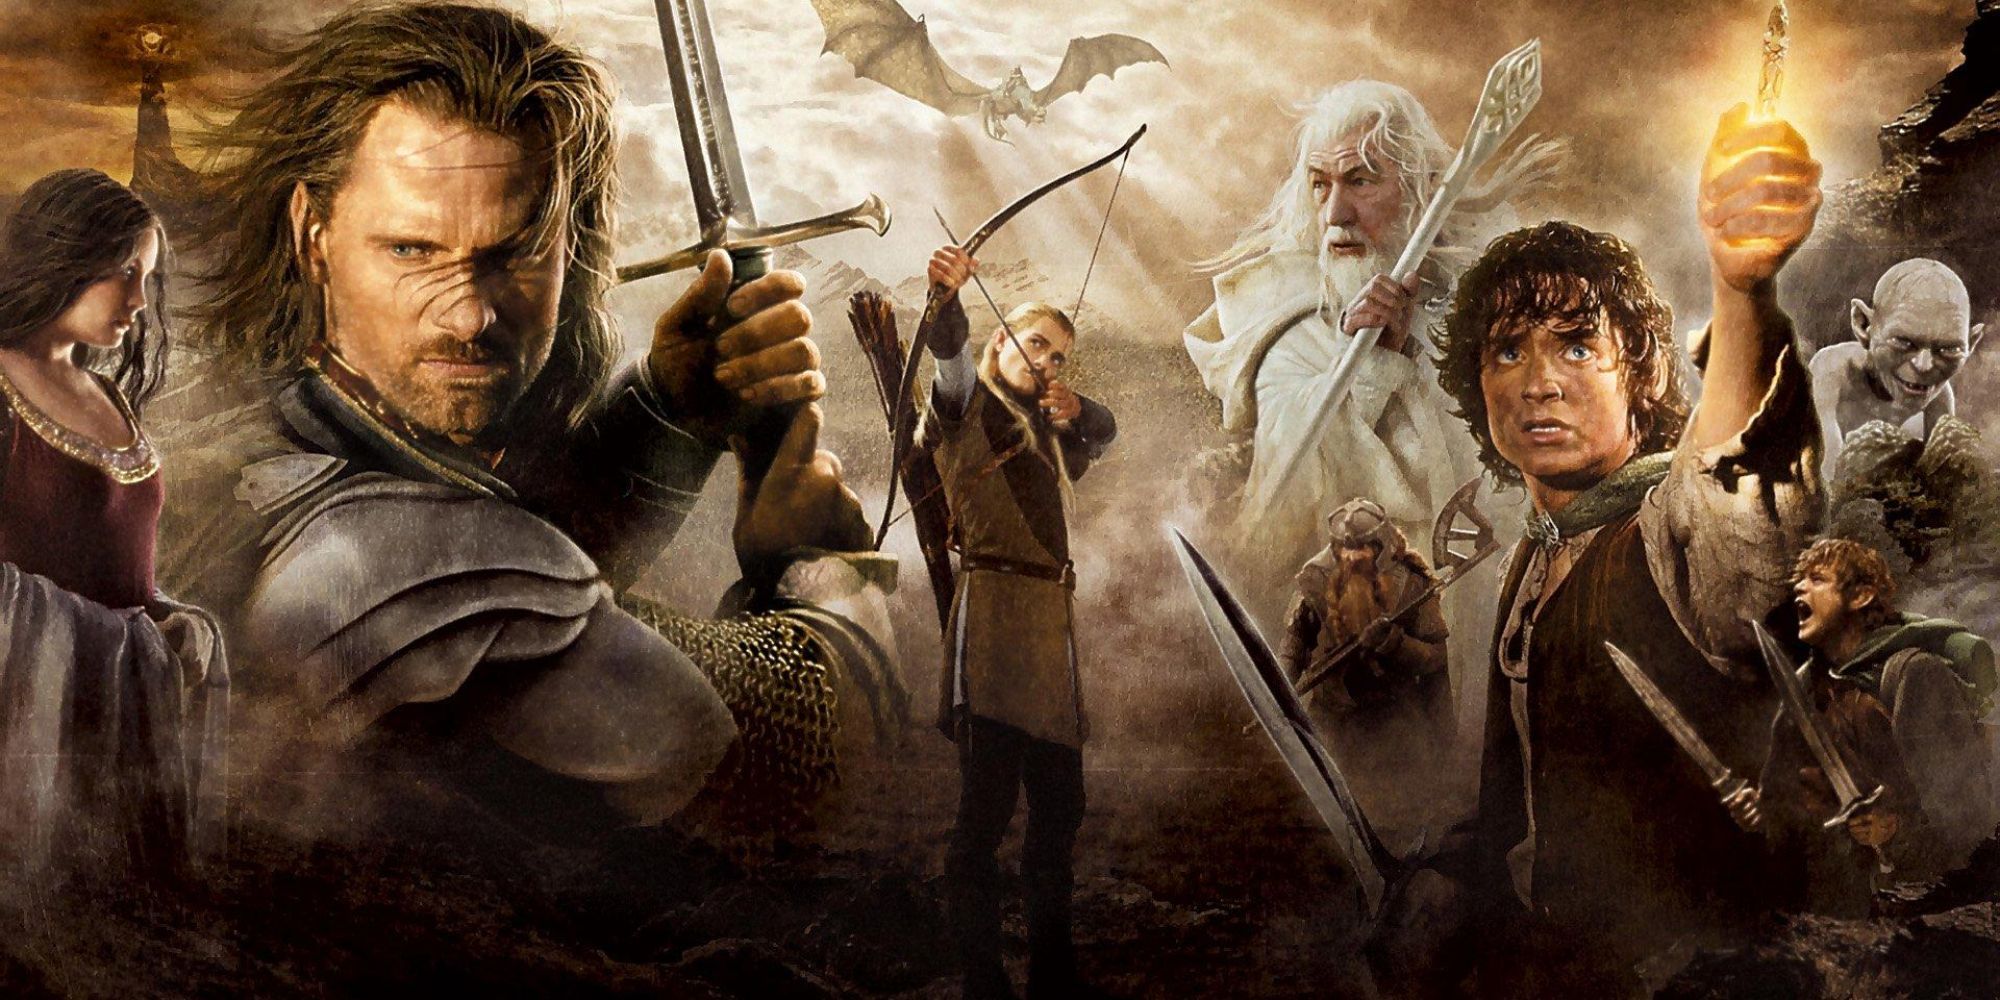 New Lord Of The Rings movie has assembled a stellar cast